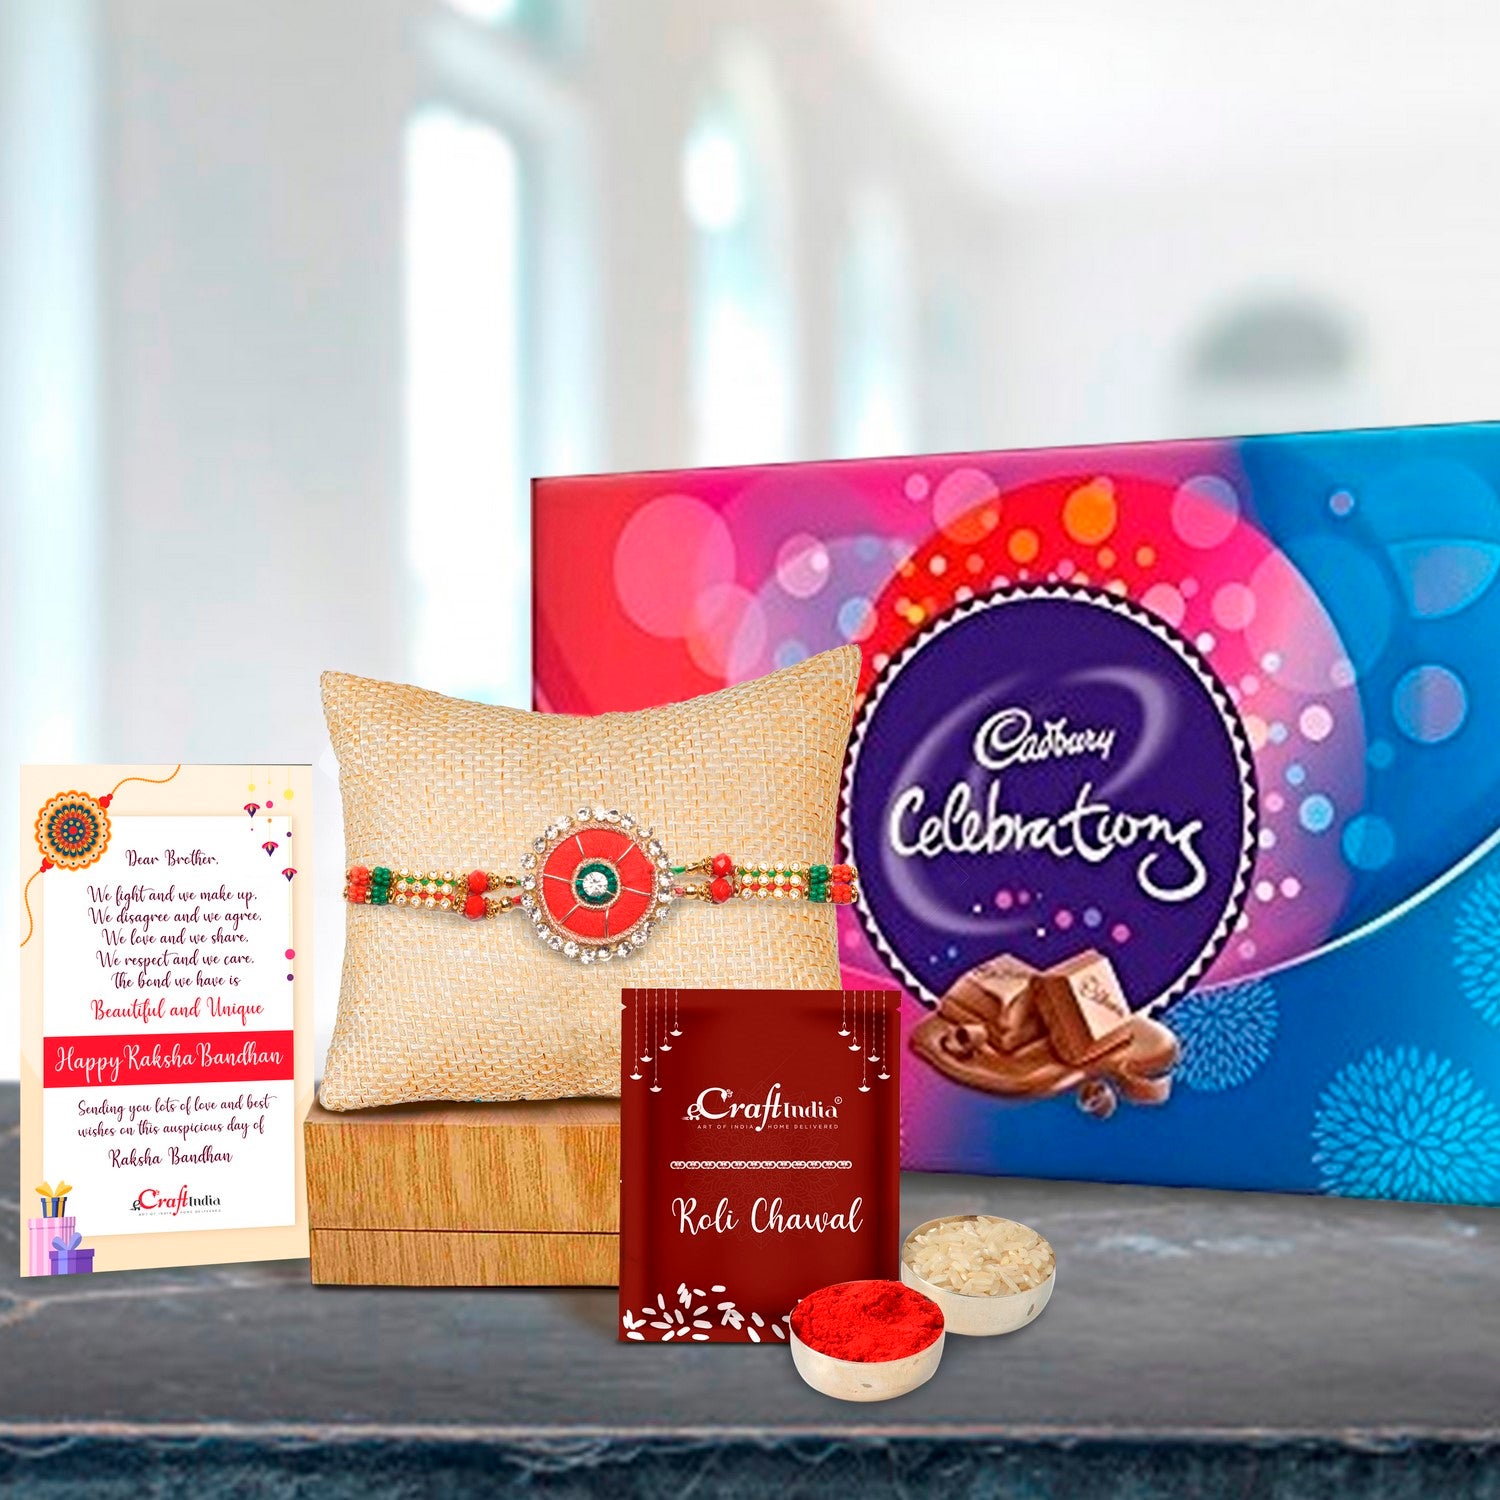 Designer Rakhi with Cadbury Celebrations Gift Pack of 7 Assorted Chocolates and Roli Chawal Pack, Best Wishes Greeting Card